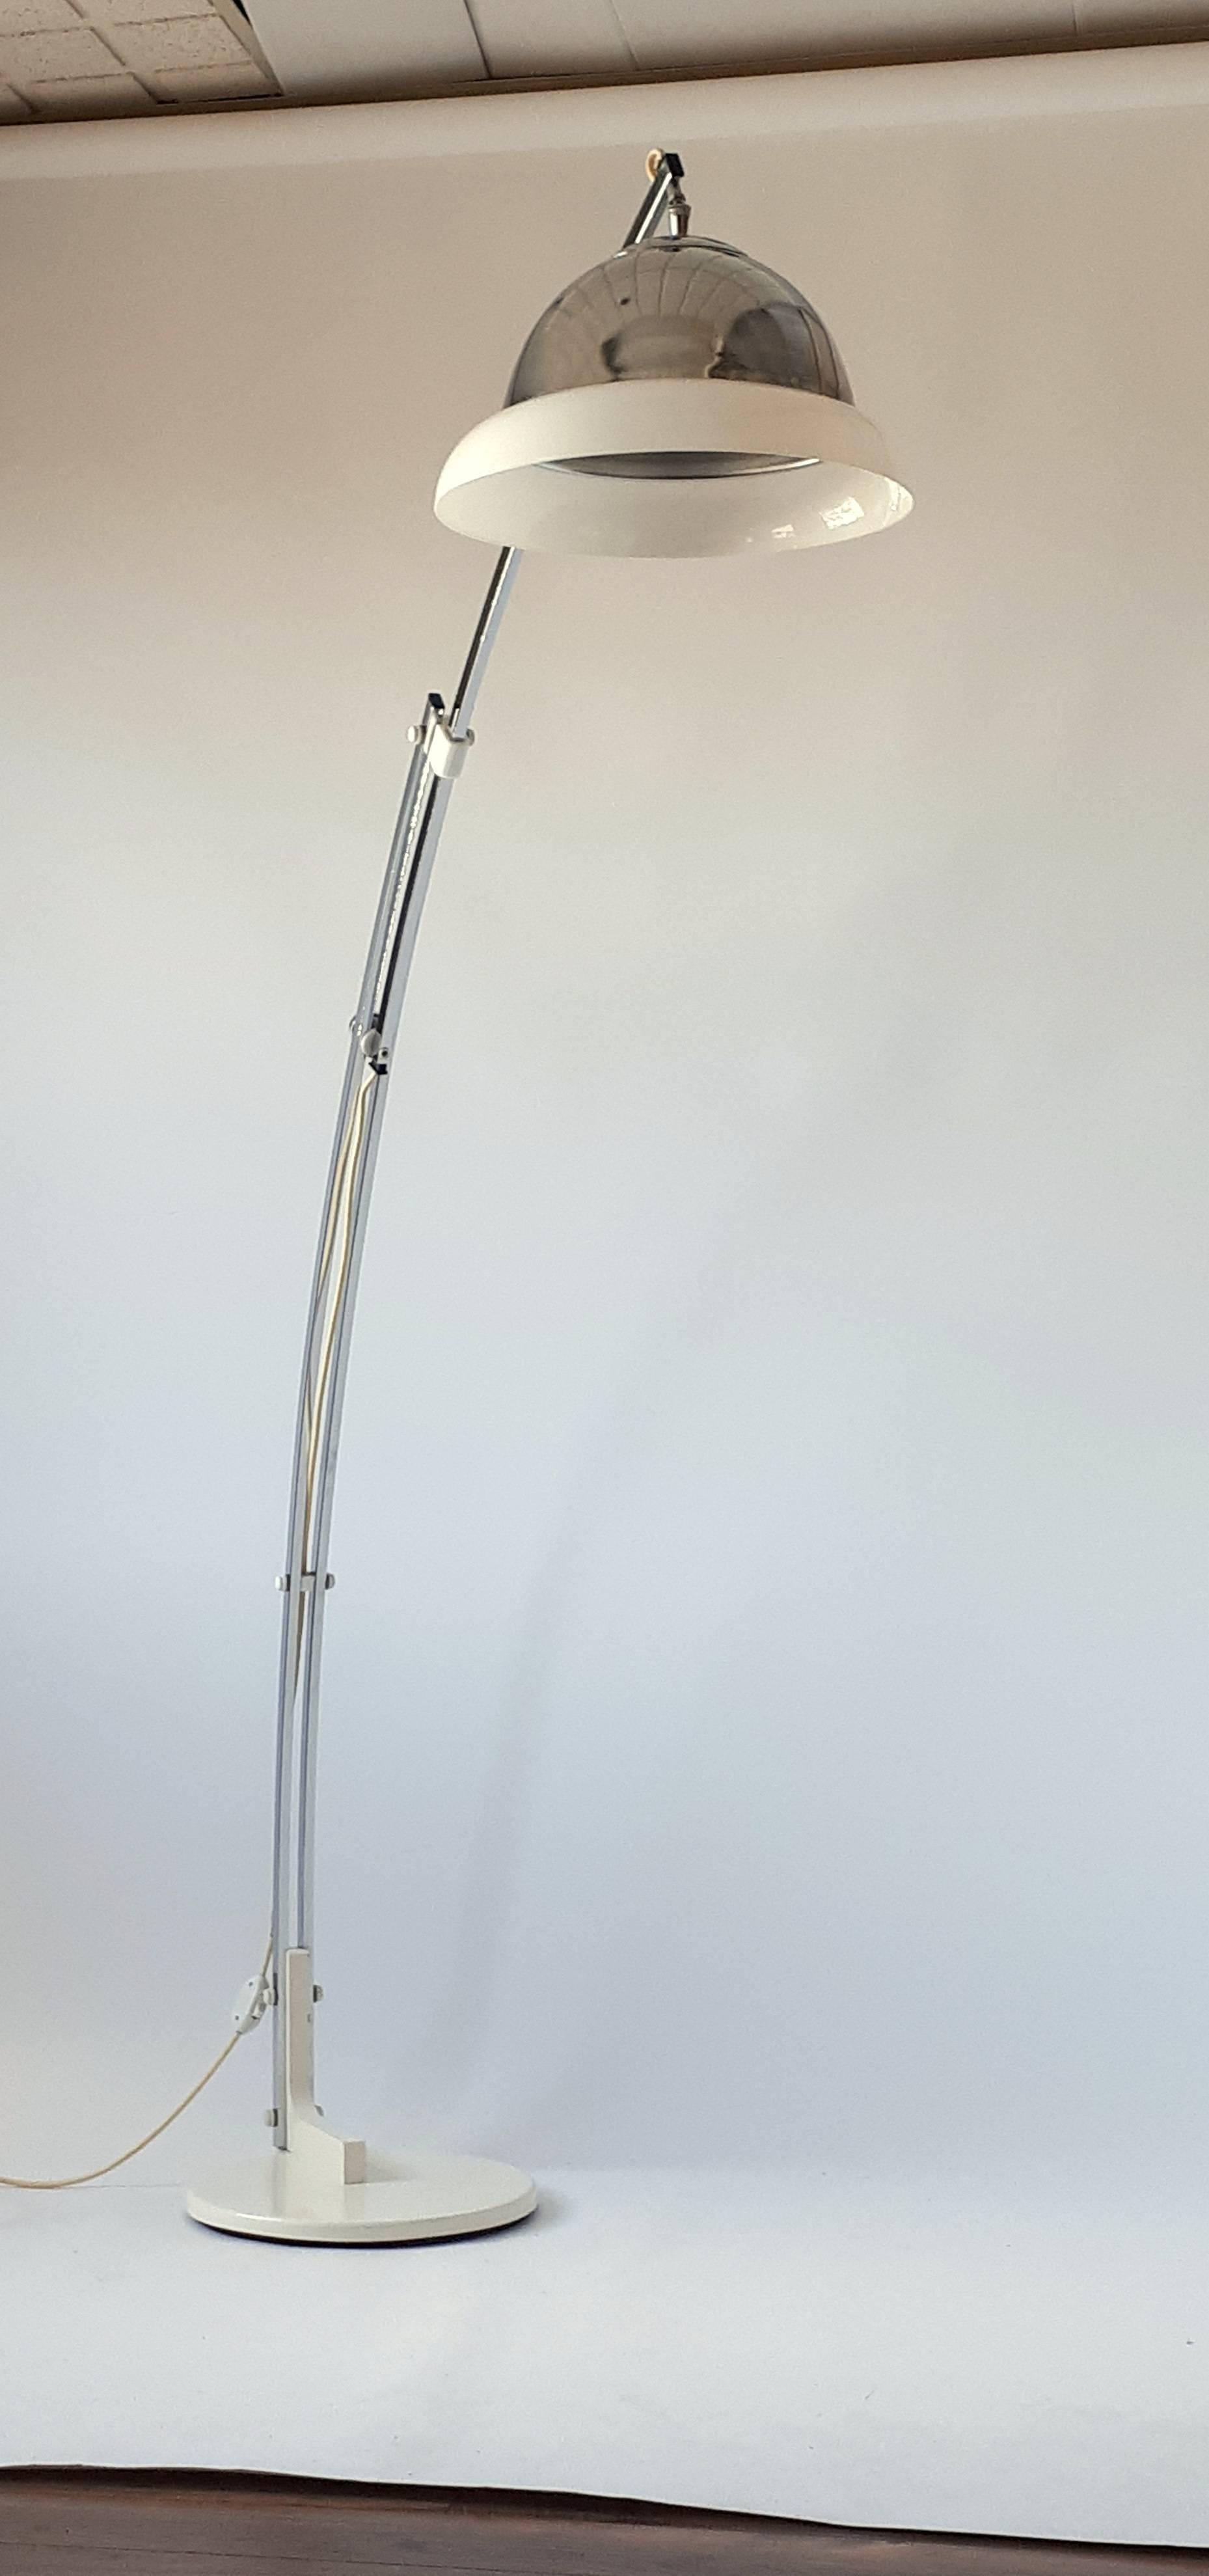 Extra tall 78 inches high Floor / Arc lamp . Does slide down to 62  inches . 

Adjustable vented chrome shade with opale acrylic outer ring.

Shade measure 16 inches at widest point . 

Total weight  is 30 pounds . 

Contain one E26 regular size